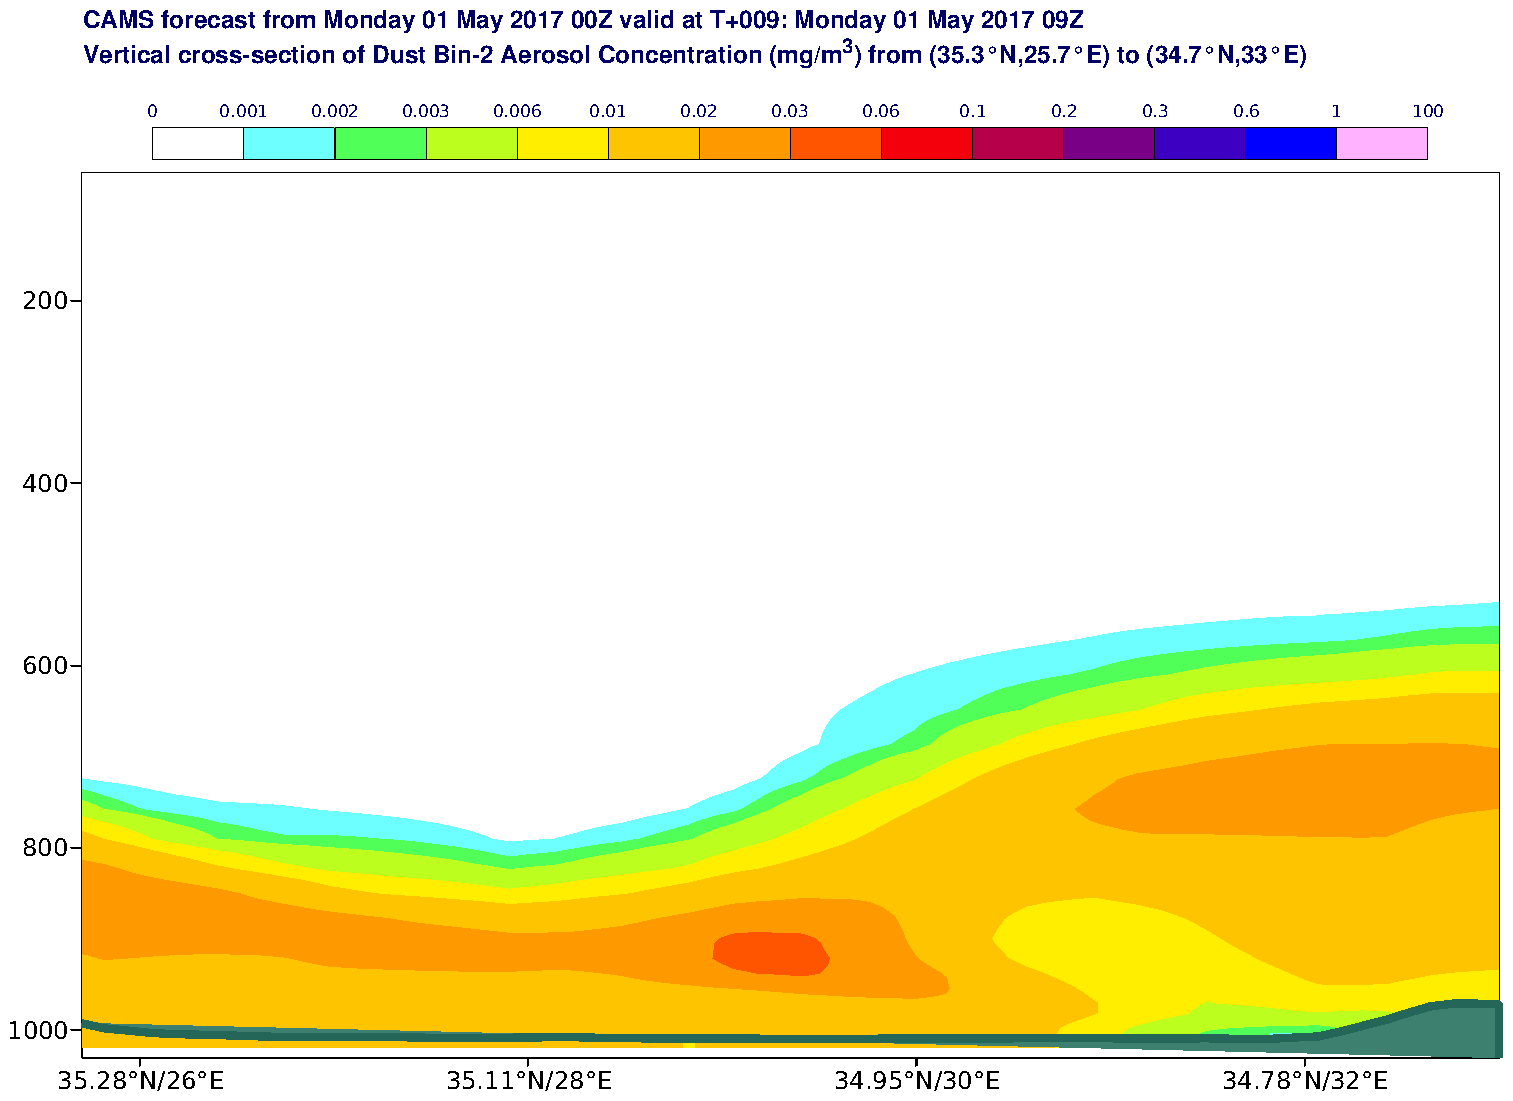 Vertical cross-section of Dust Bin-2 Aerosol Concentration (mg/m3) valid at T9 - 2017-05-01 09:00